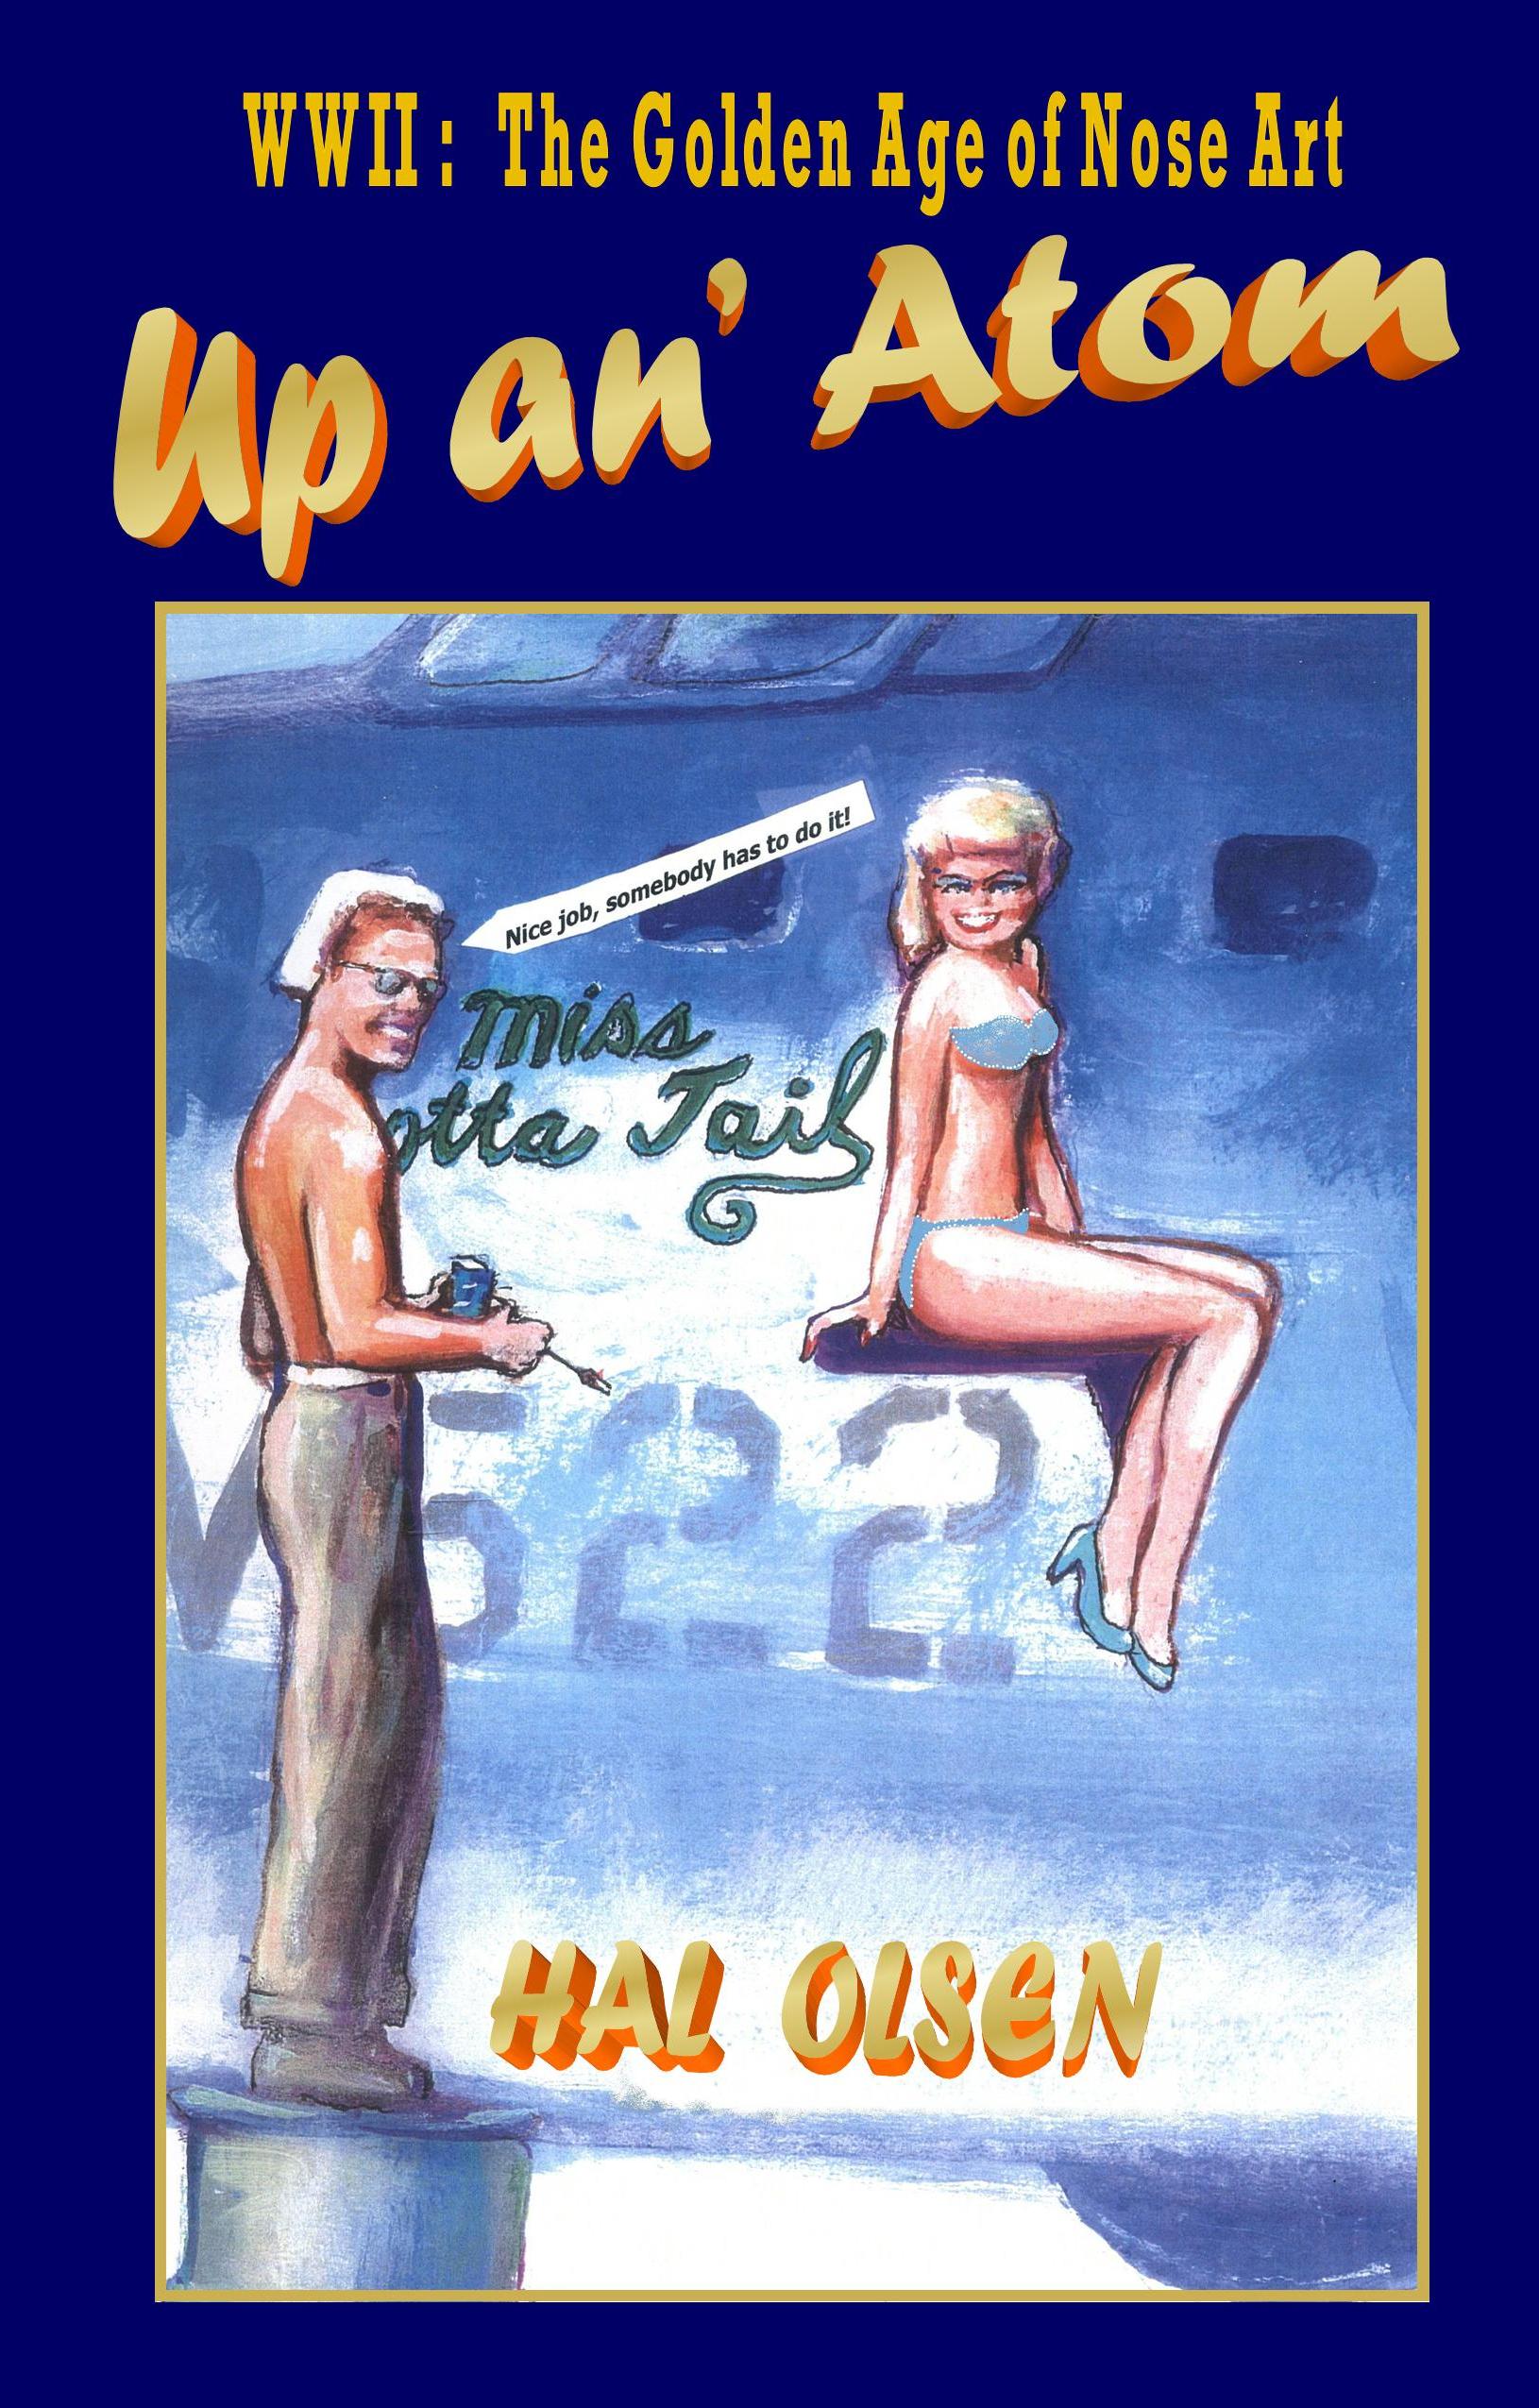 Up an' Atom by Hal Olsen - WW II The Golden Age of Nose Art